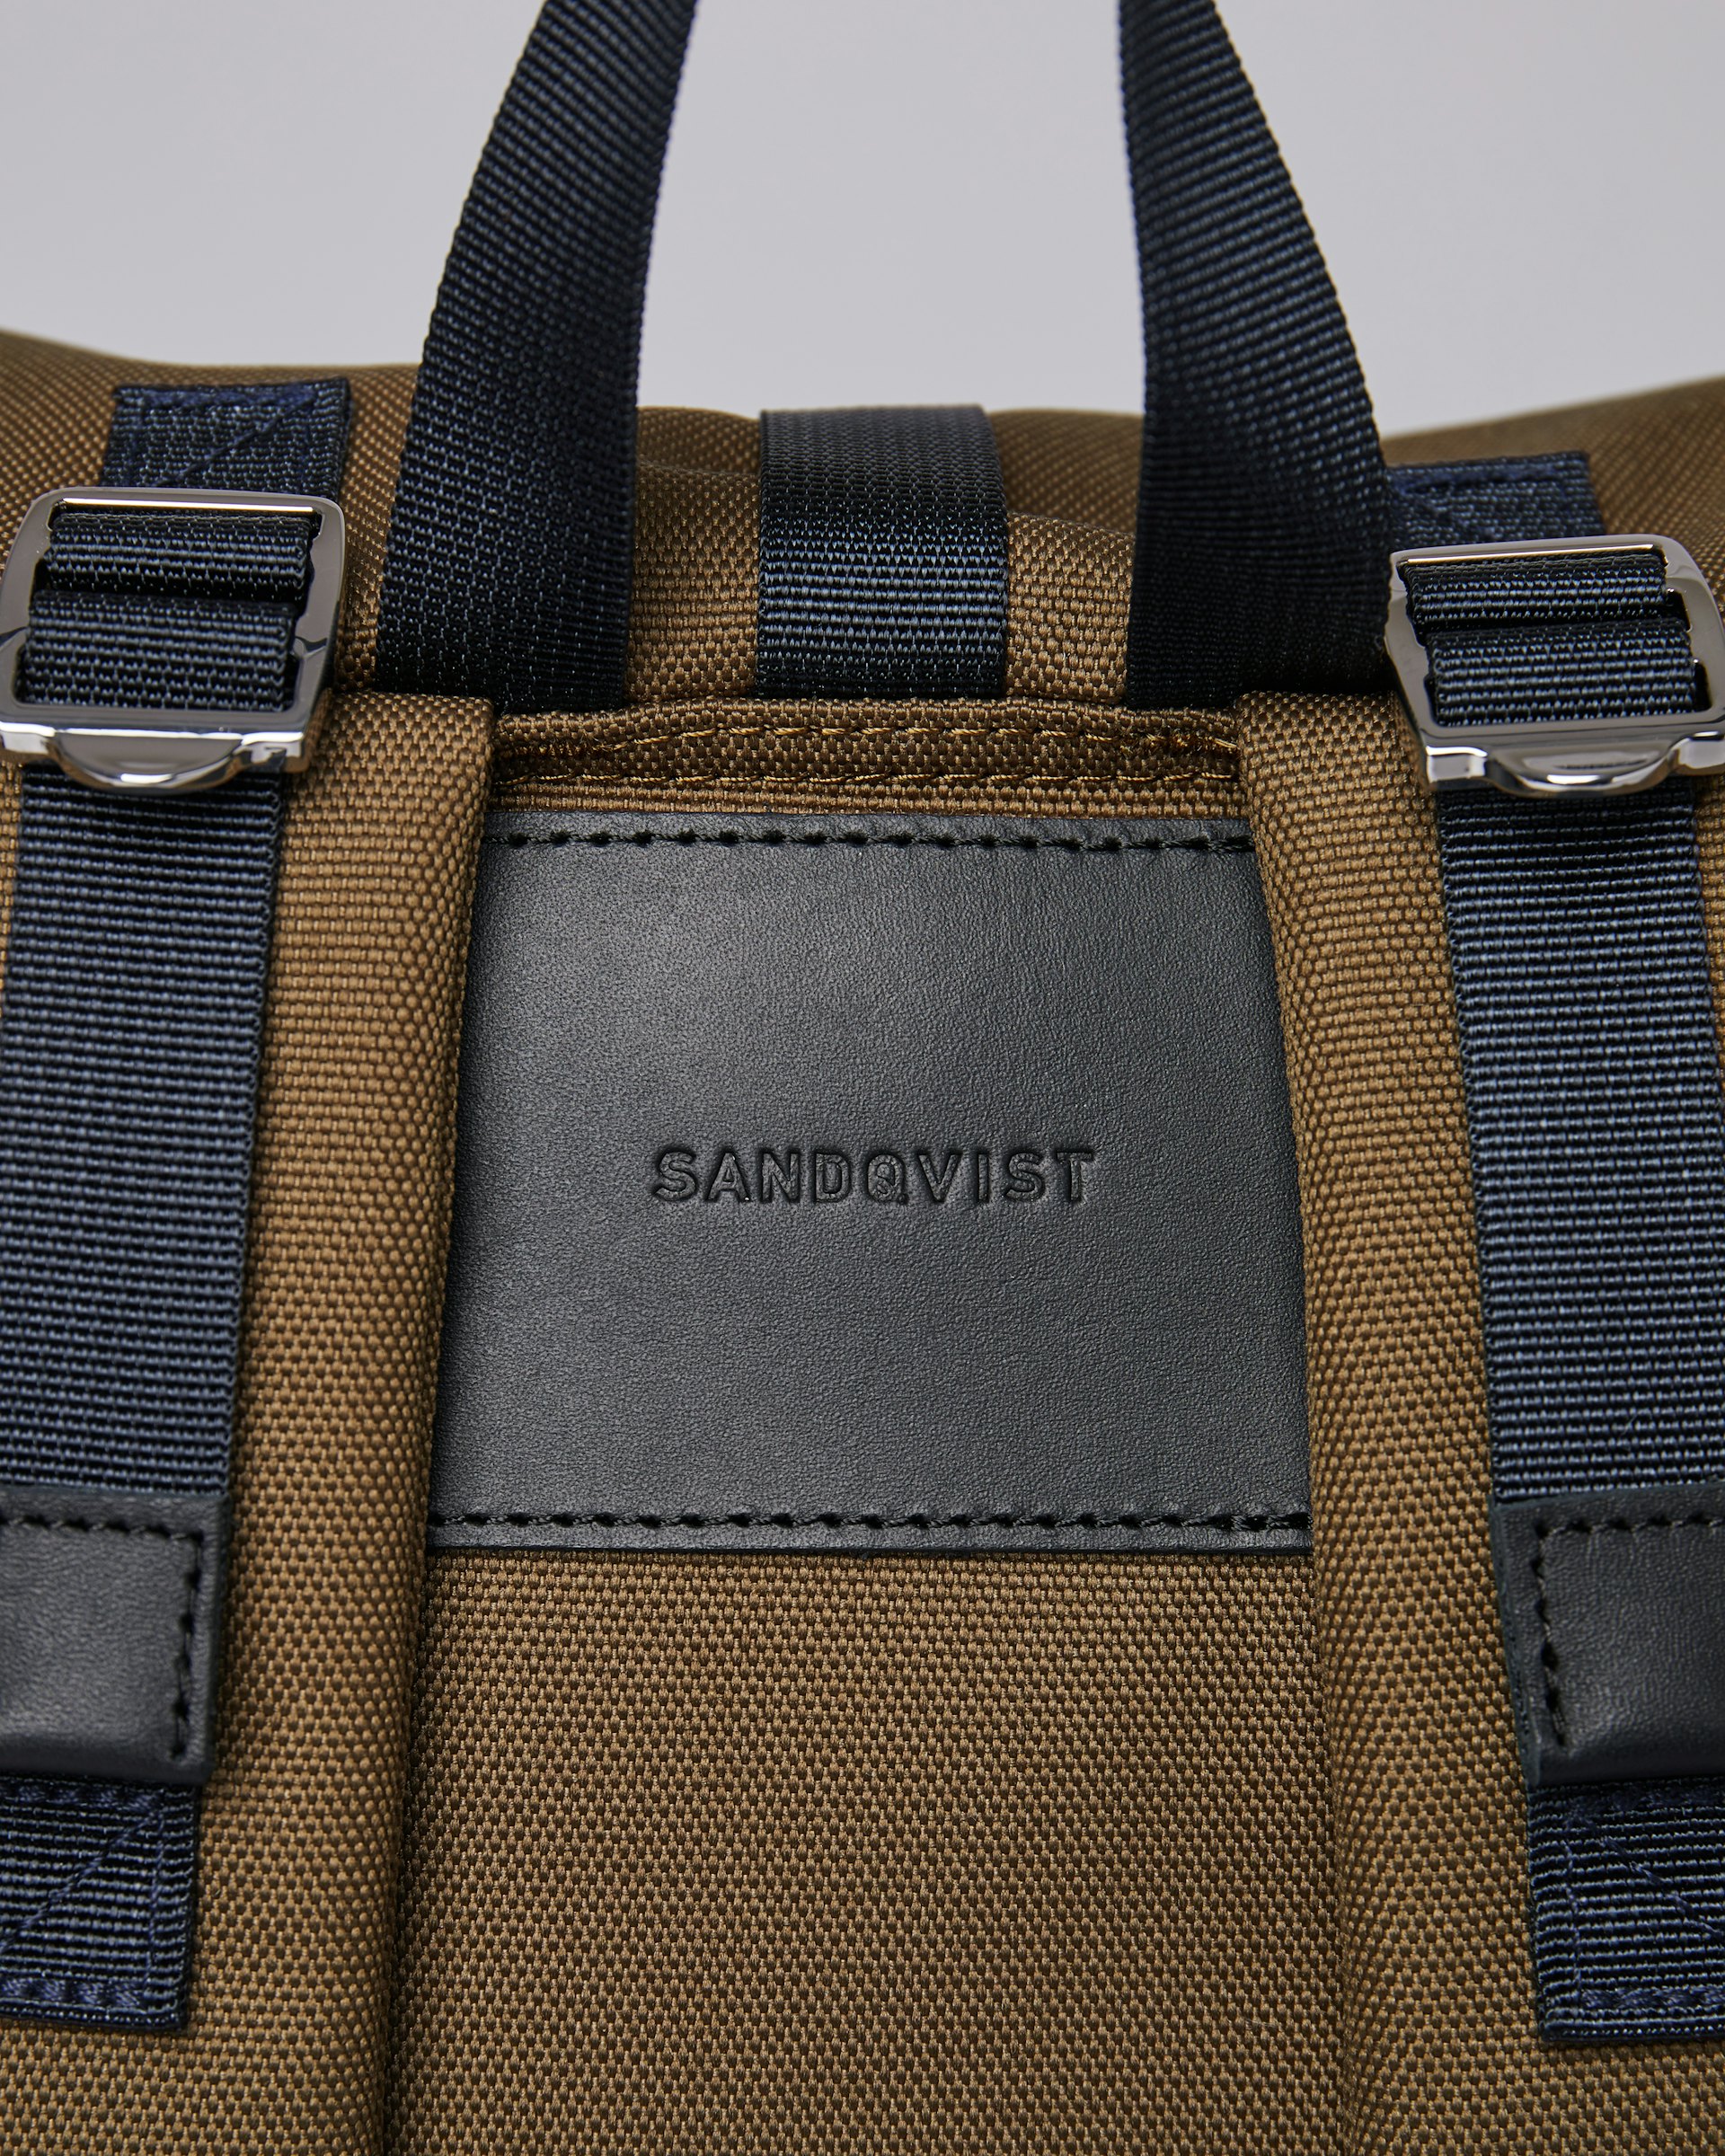 Bernt belongs to the category Backpacks and is in color olive (5 of 7)